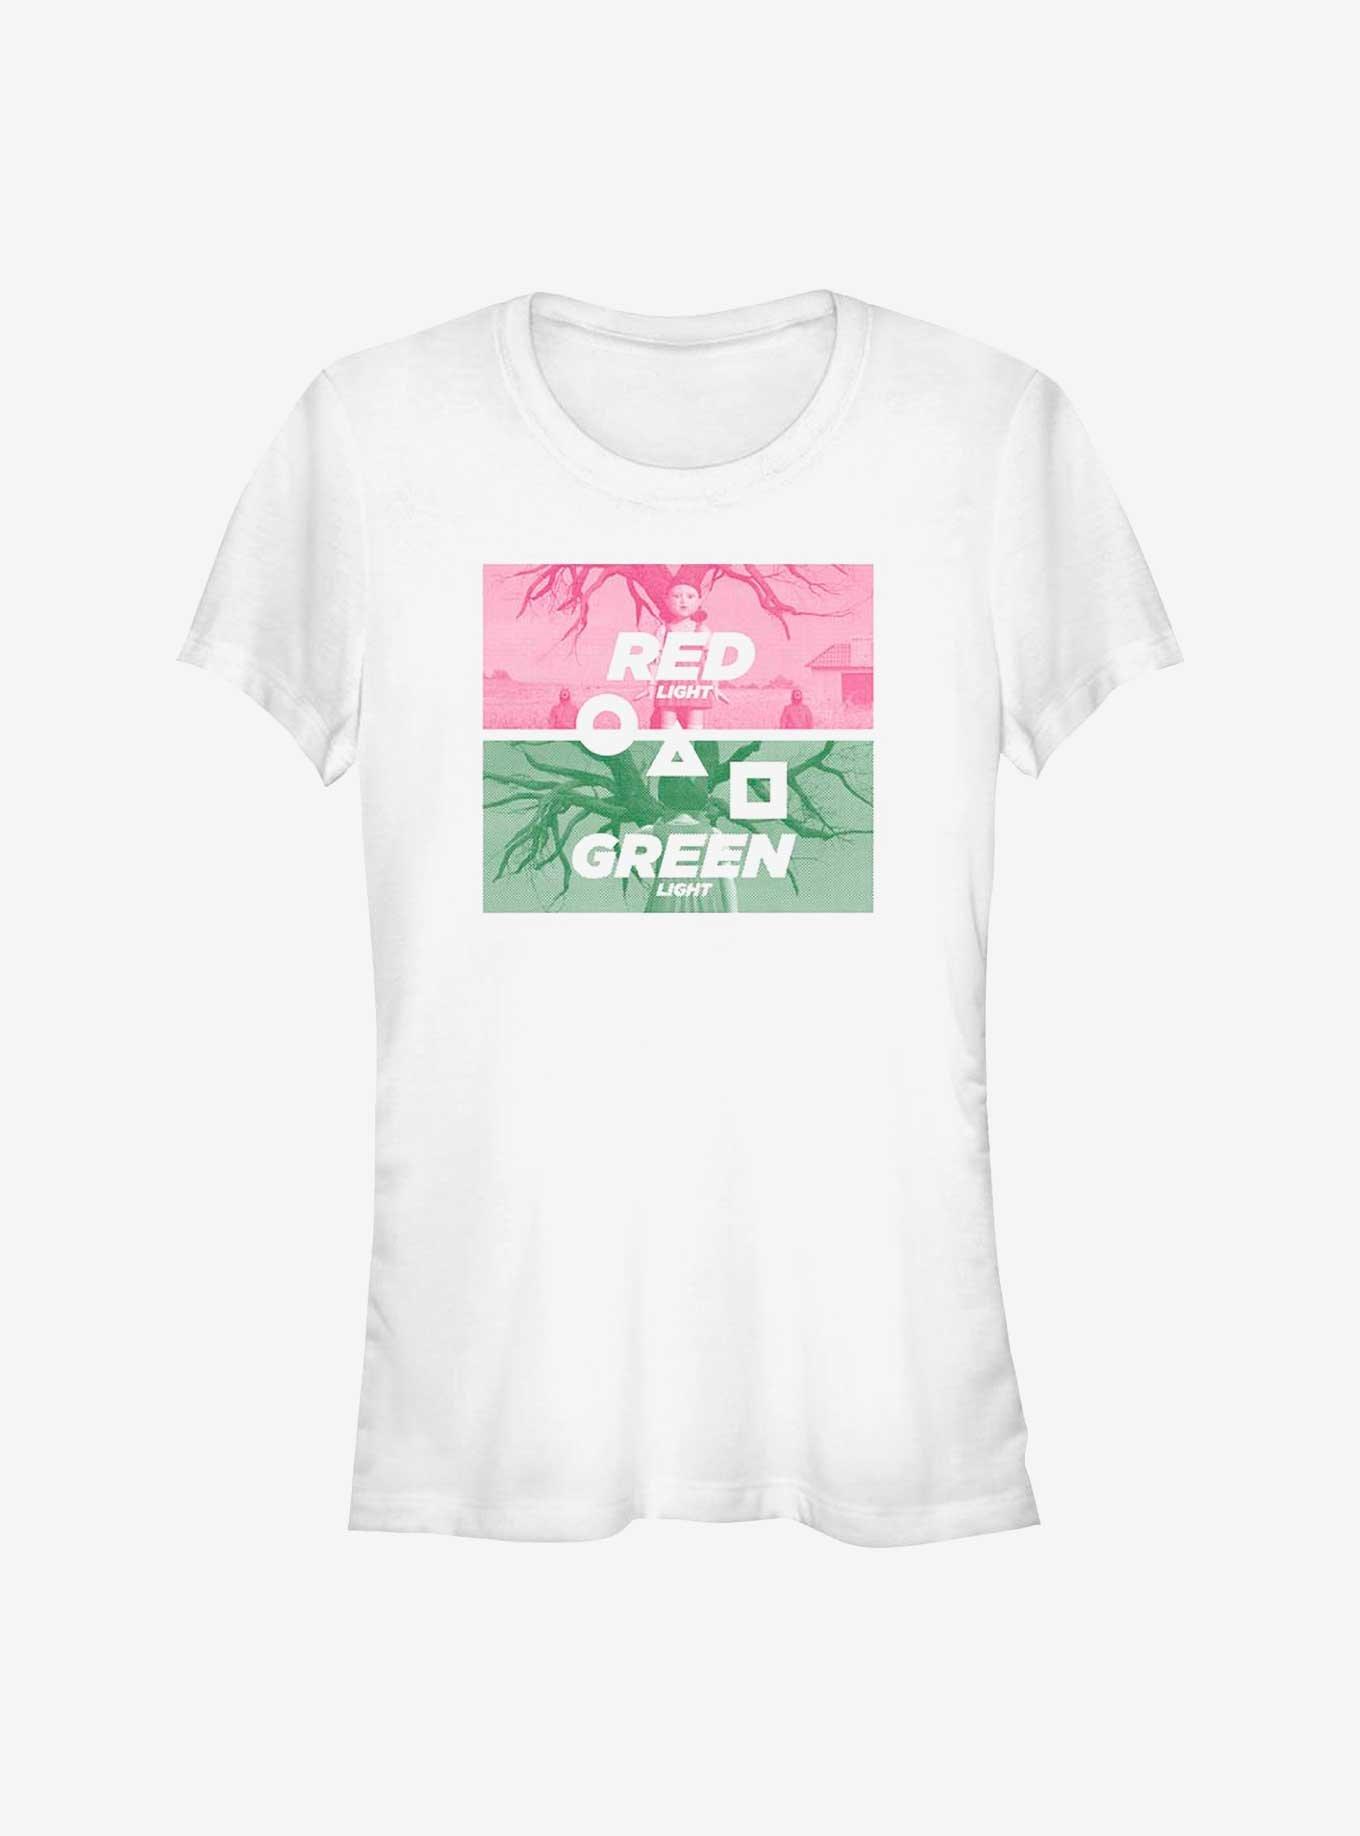 Squid Game First Game Red Light Green Light Girls T-Shirt, WHITE, hi-res